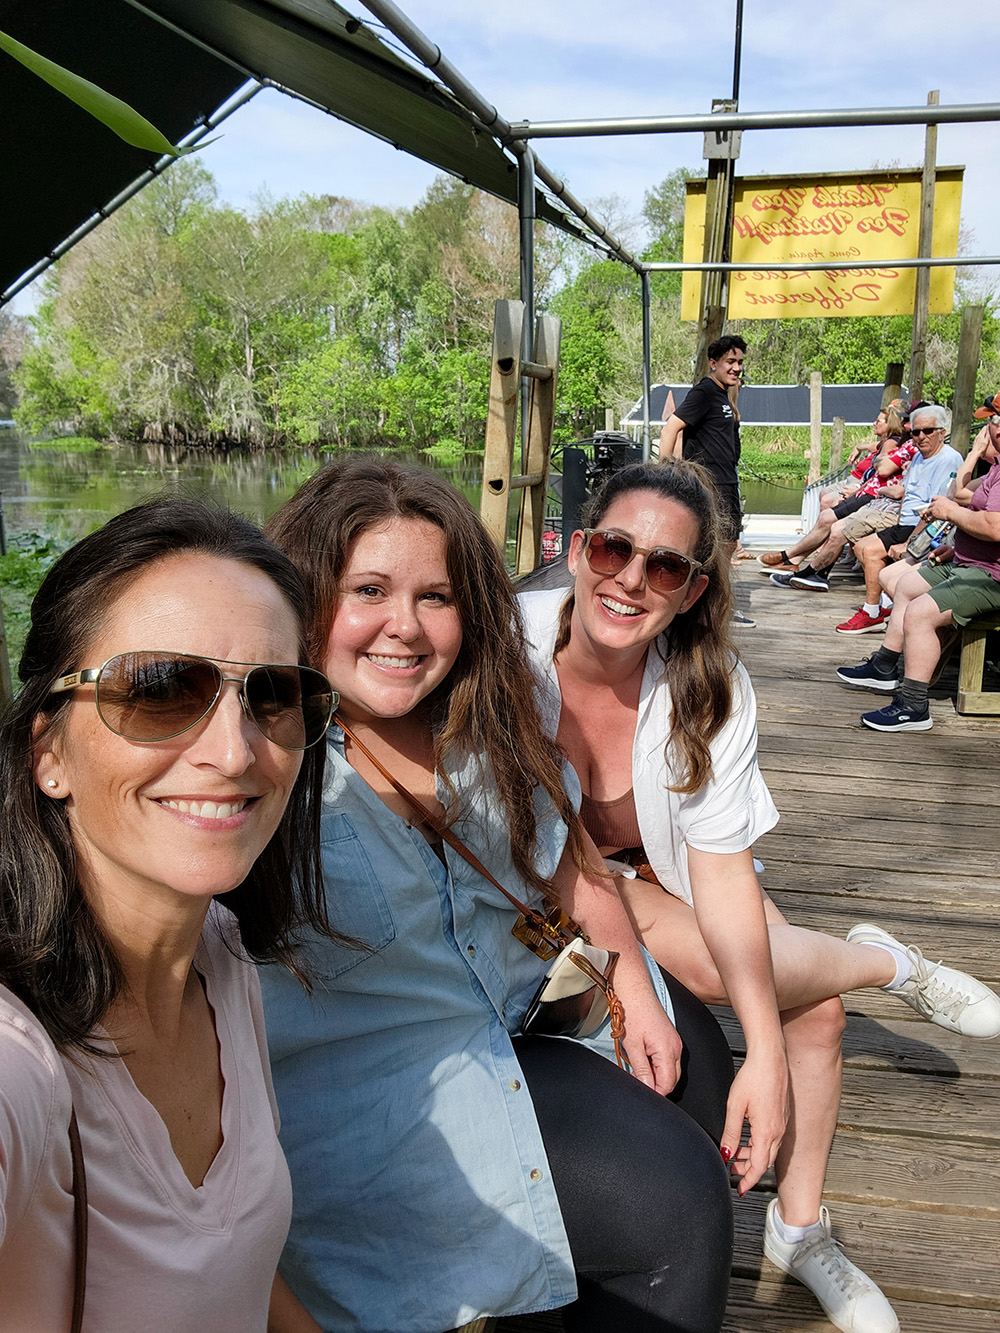 Wild Bill's Airboat Tours. Travel Tips for A Visit to Inverness FL. A recap of where we stayed, fun outdoor activities to try, and delicious restaurants for a small-town girls' trip!